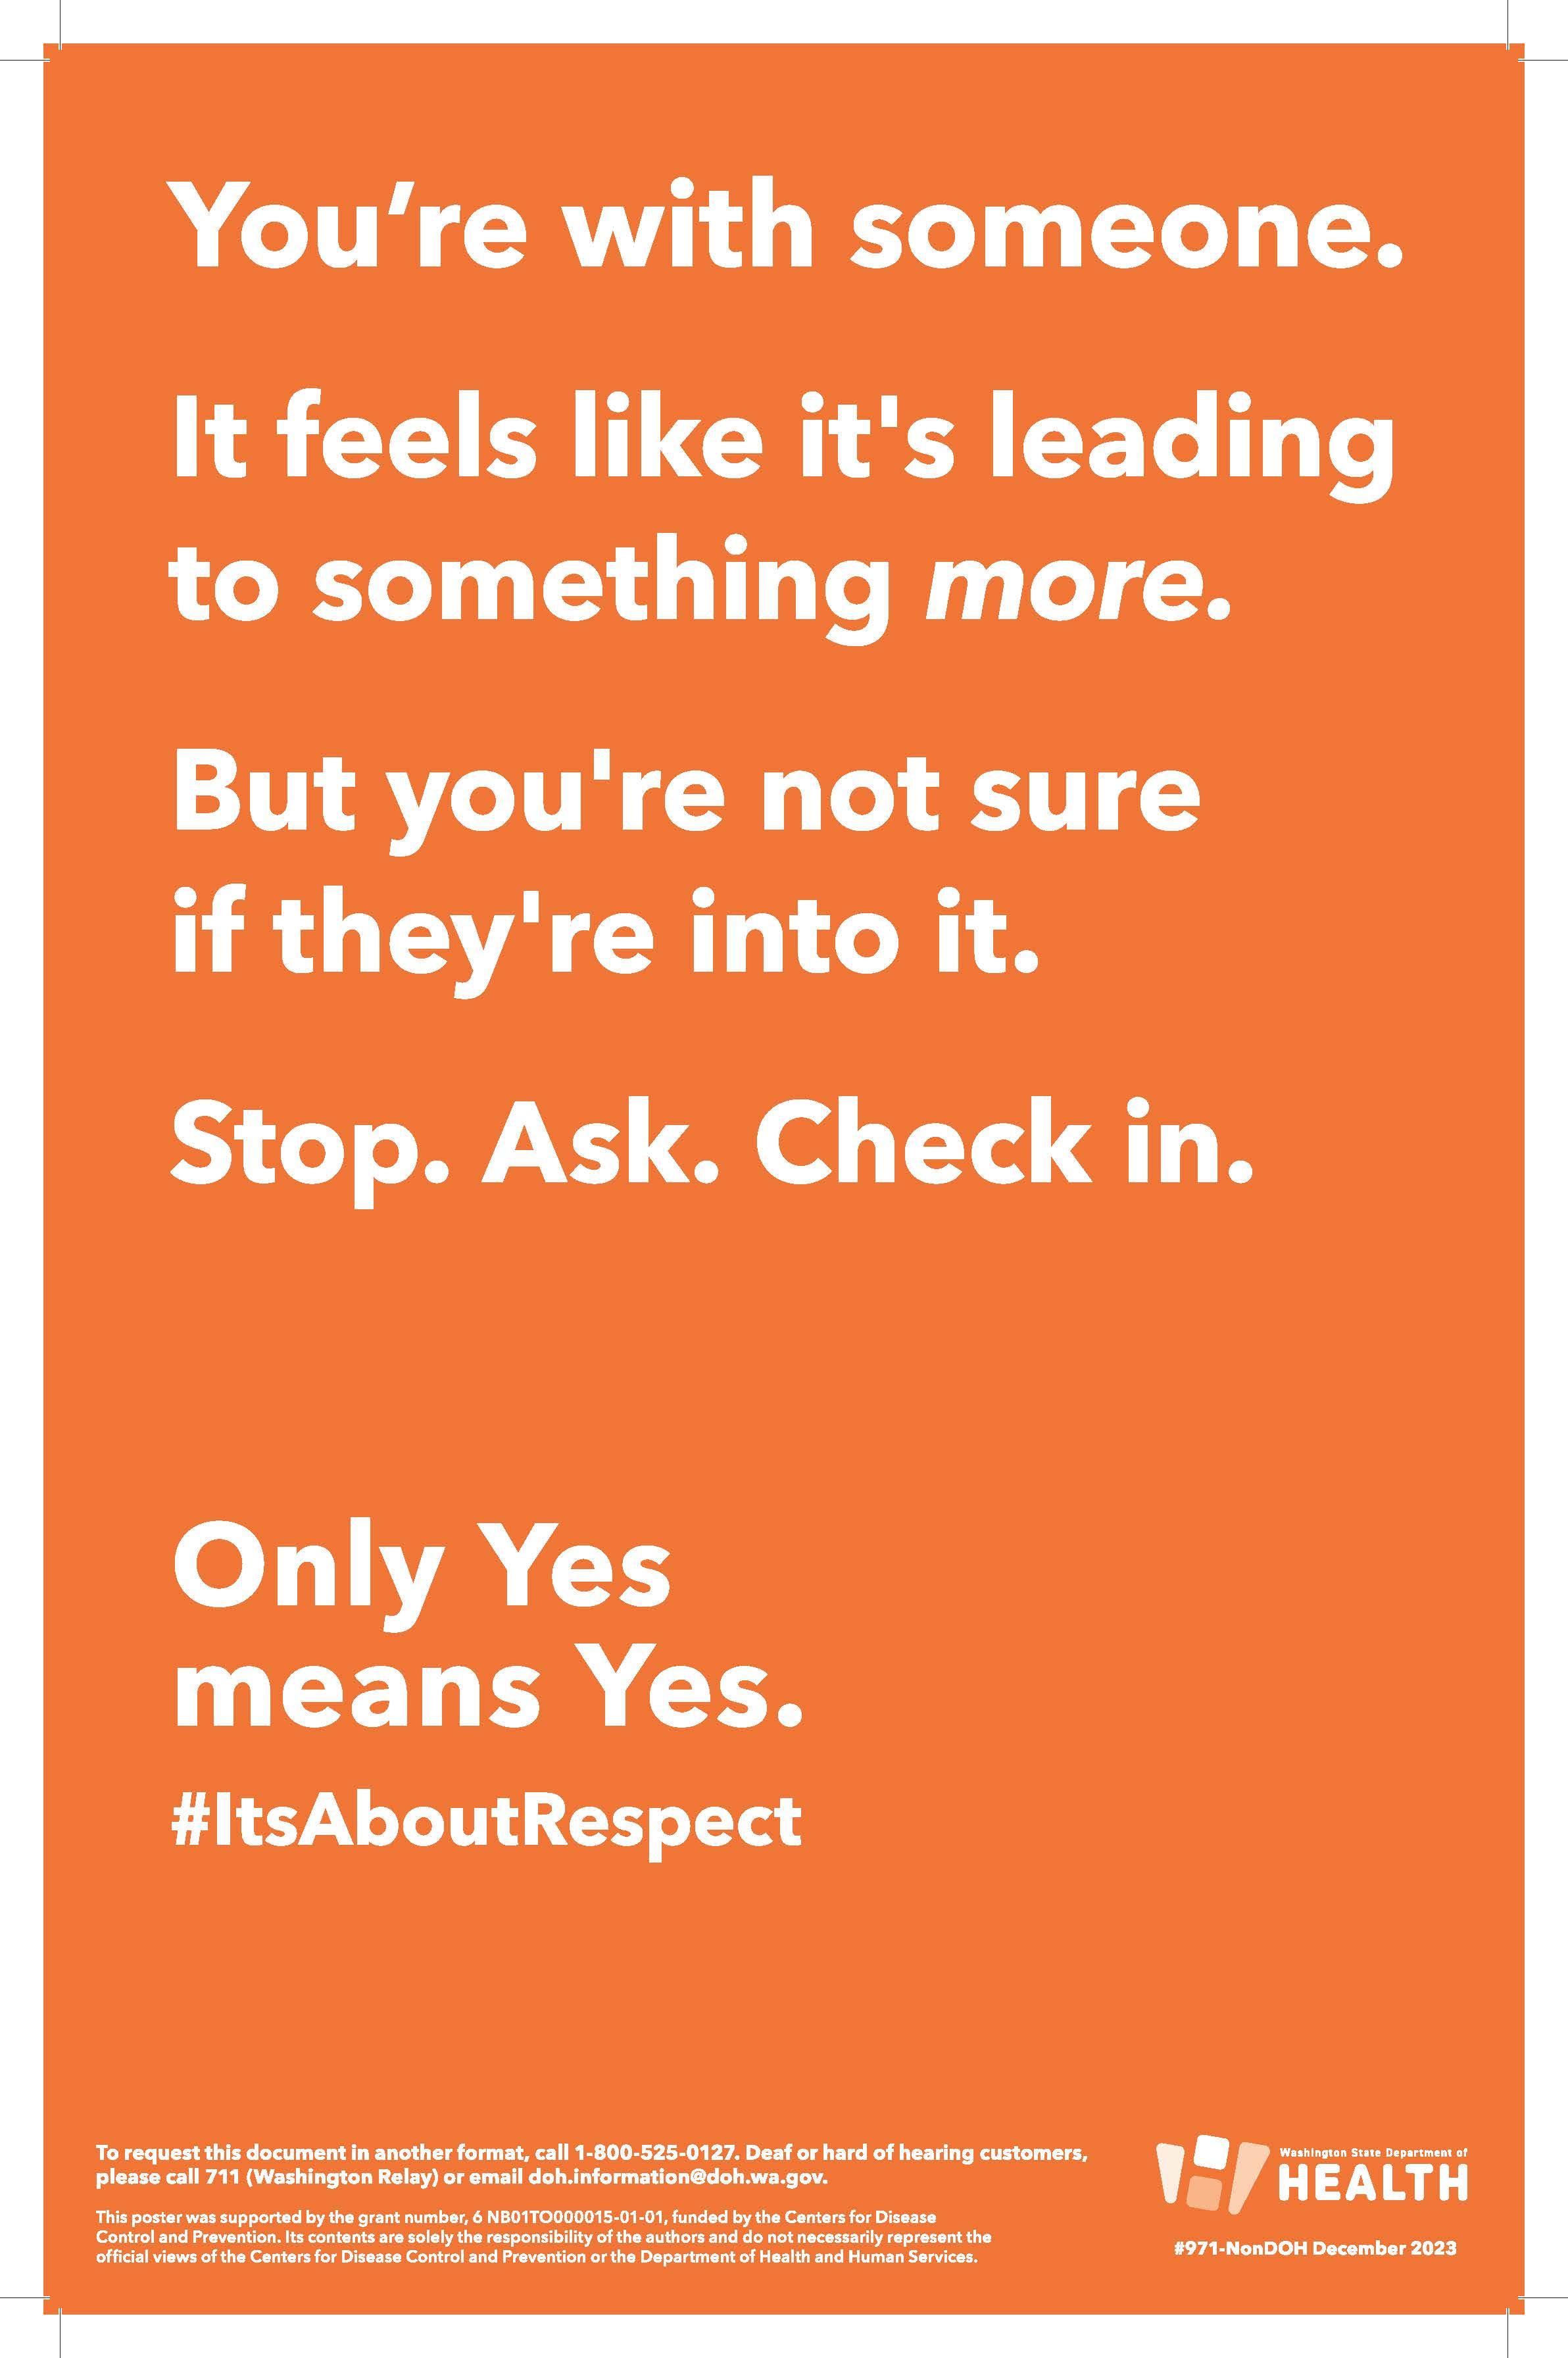 This poster image says “You're with someone. It feels like it's leading to something more. But you're not sure if they're into it. Stop. Ask. Check in.” It features a cat in a plumed hat and the hashtag “it's about respect”.